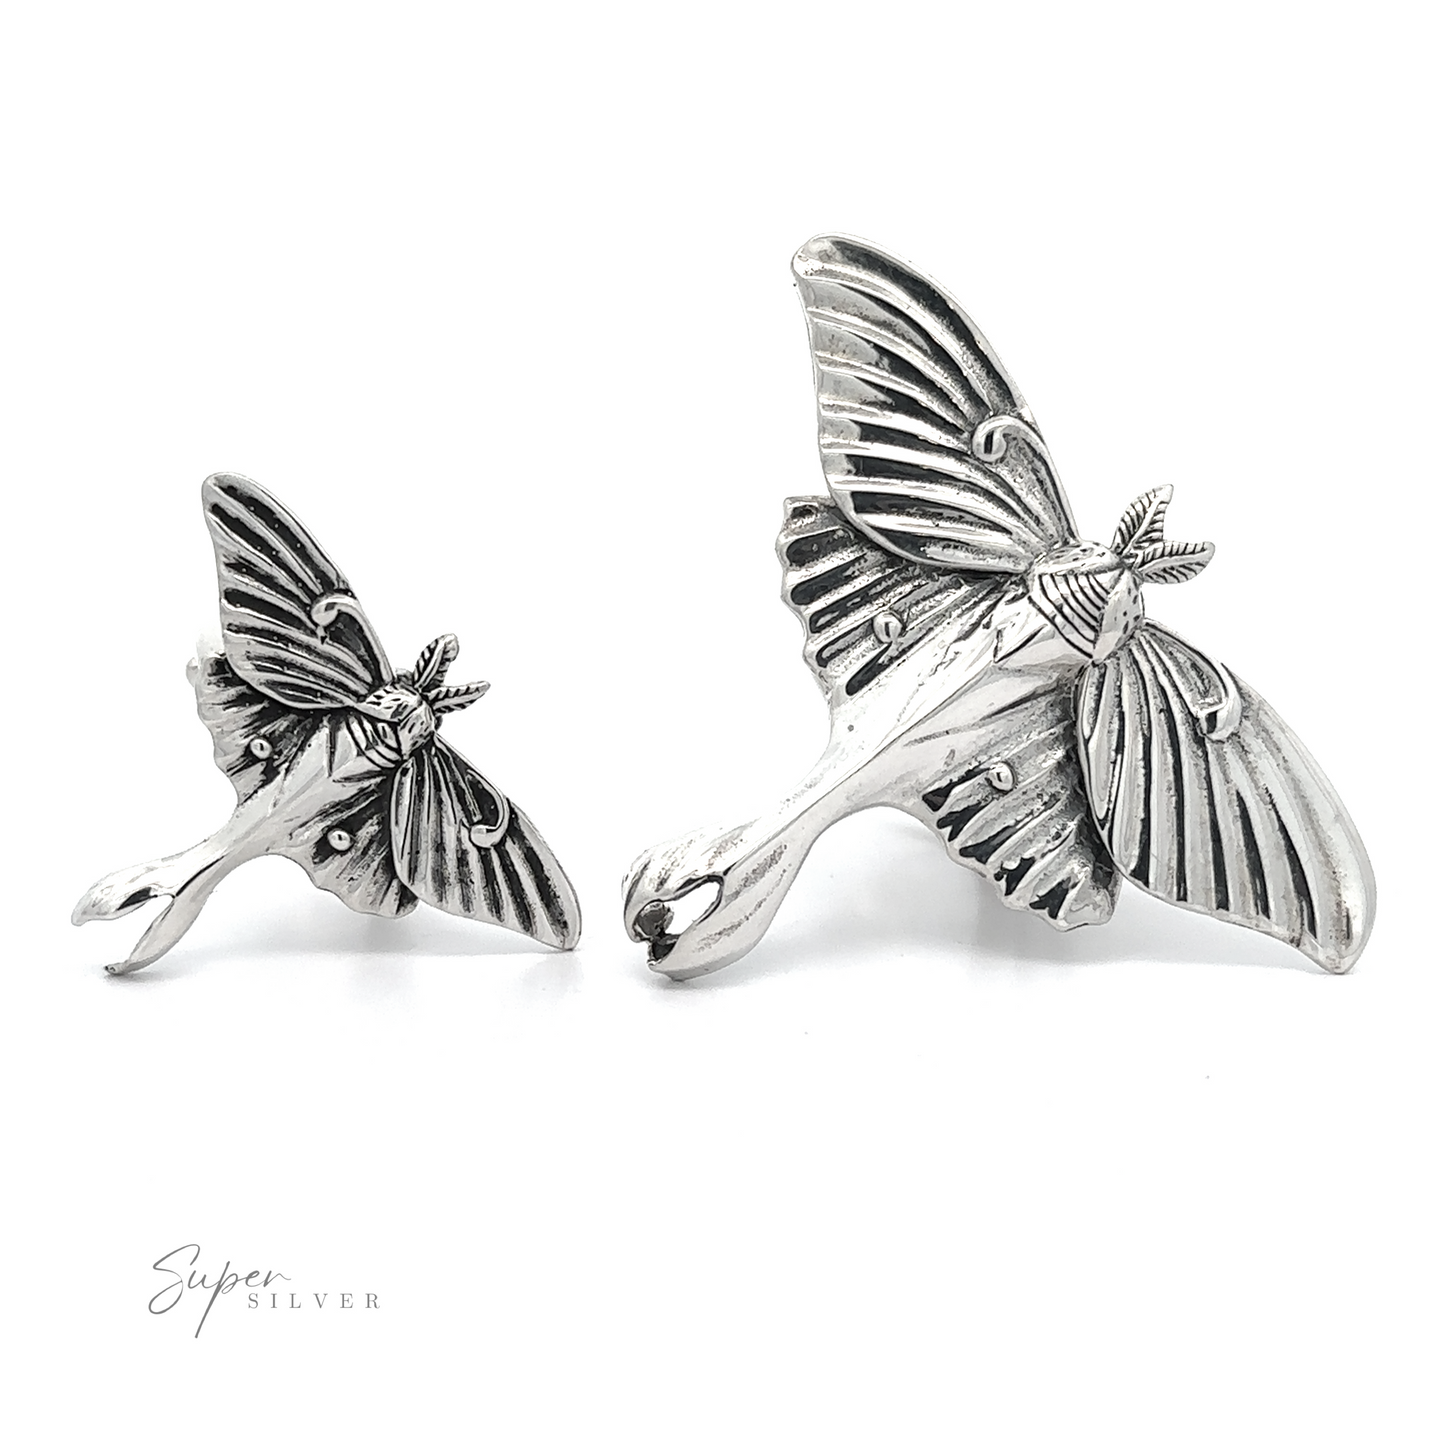 A pair of Statement Lunar Moth Ring earrings with detailed wing engravings, displayed on a white background.